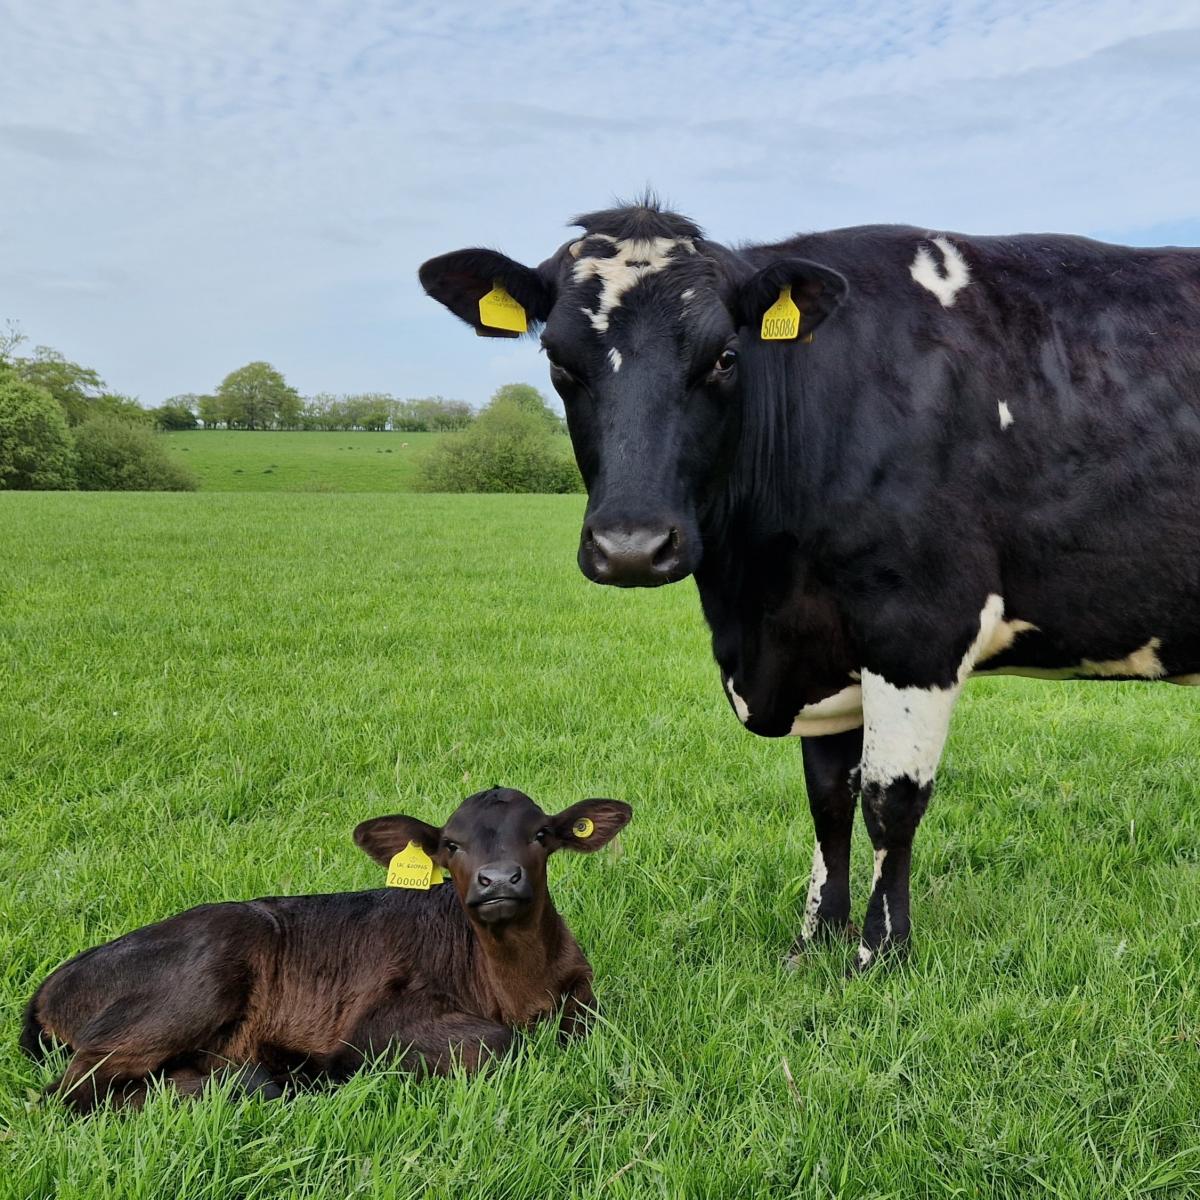 Emma Dempster (Greenfield Farm, Strathaven) - First calves to be born on the farm in 30 years (Pic taken in 2023)